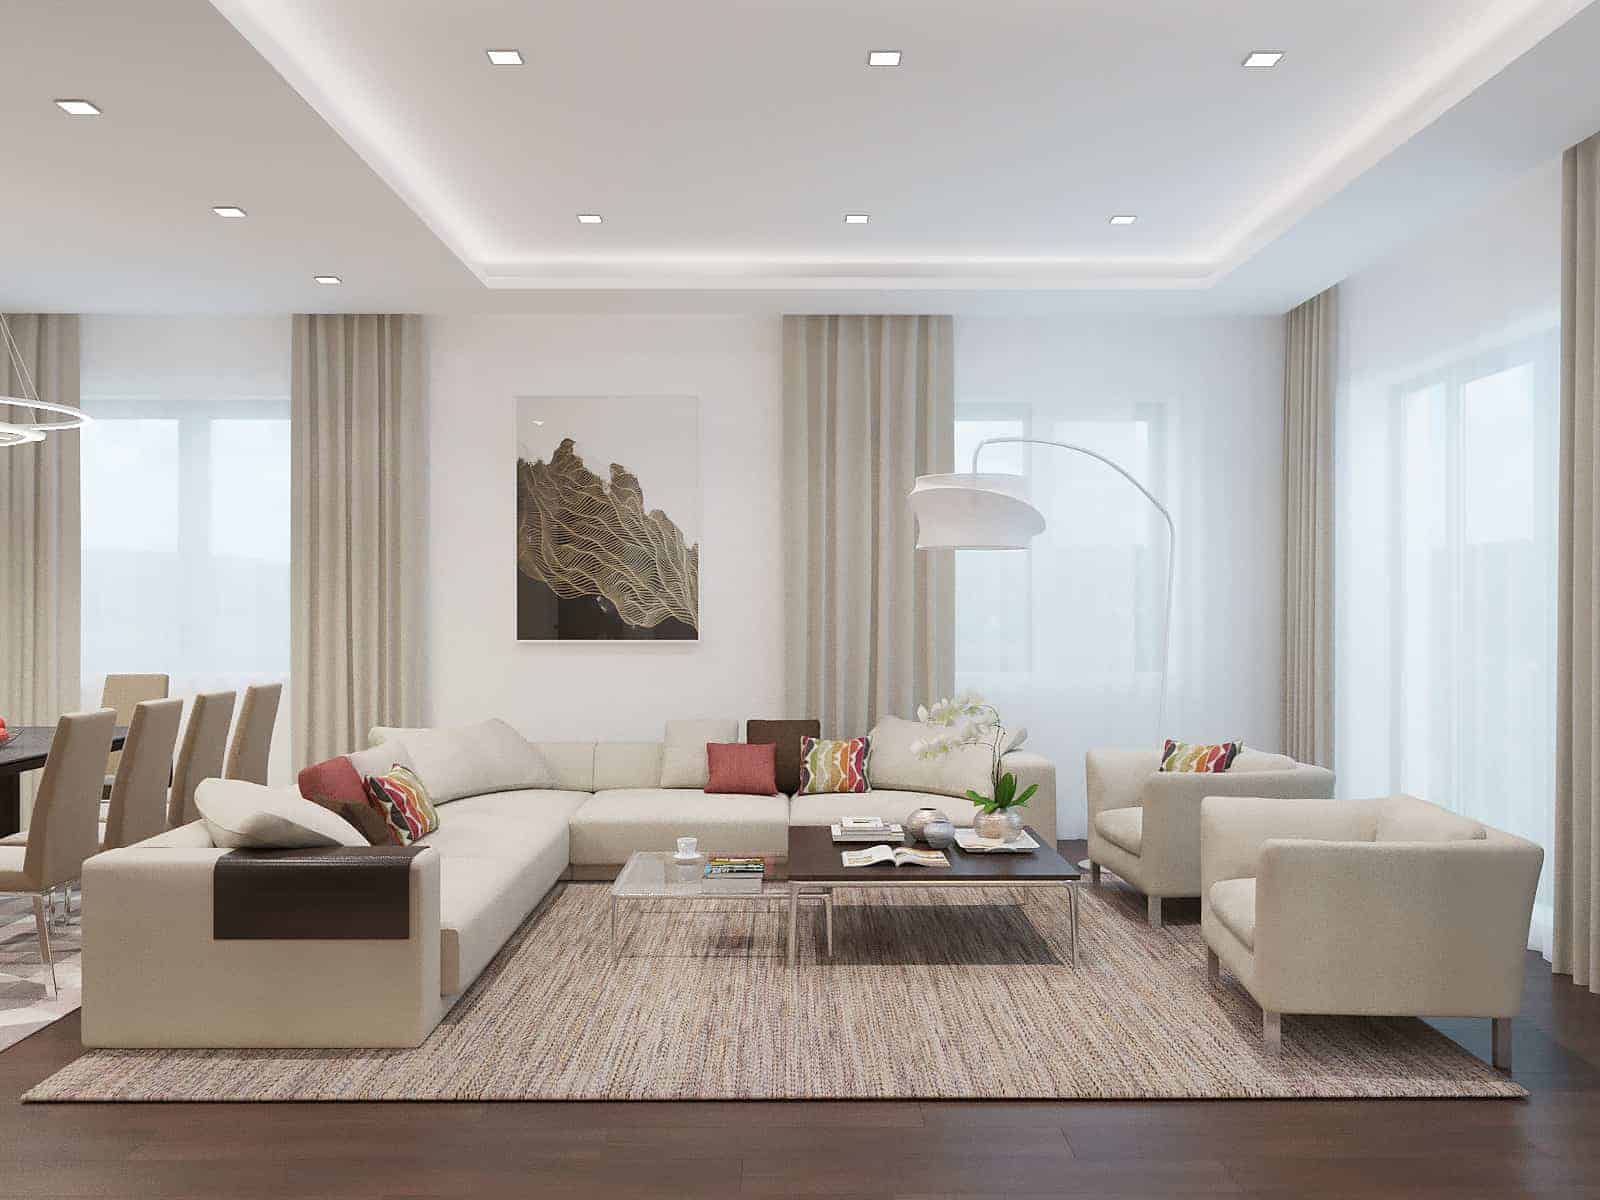 Living Room With Light Colors